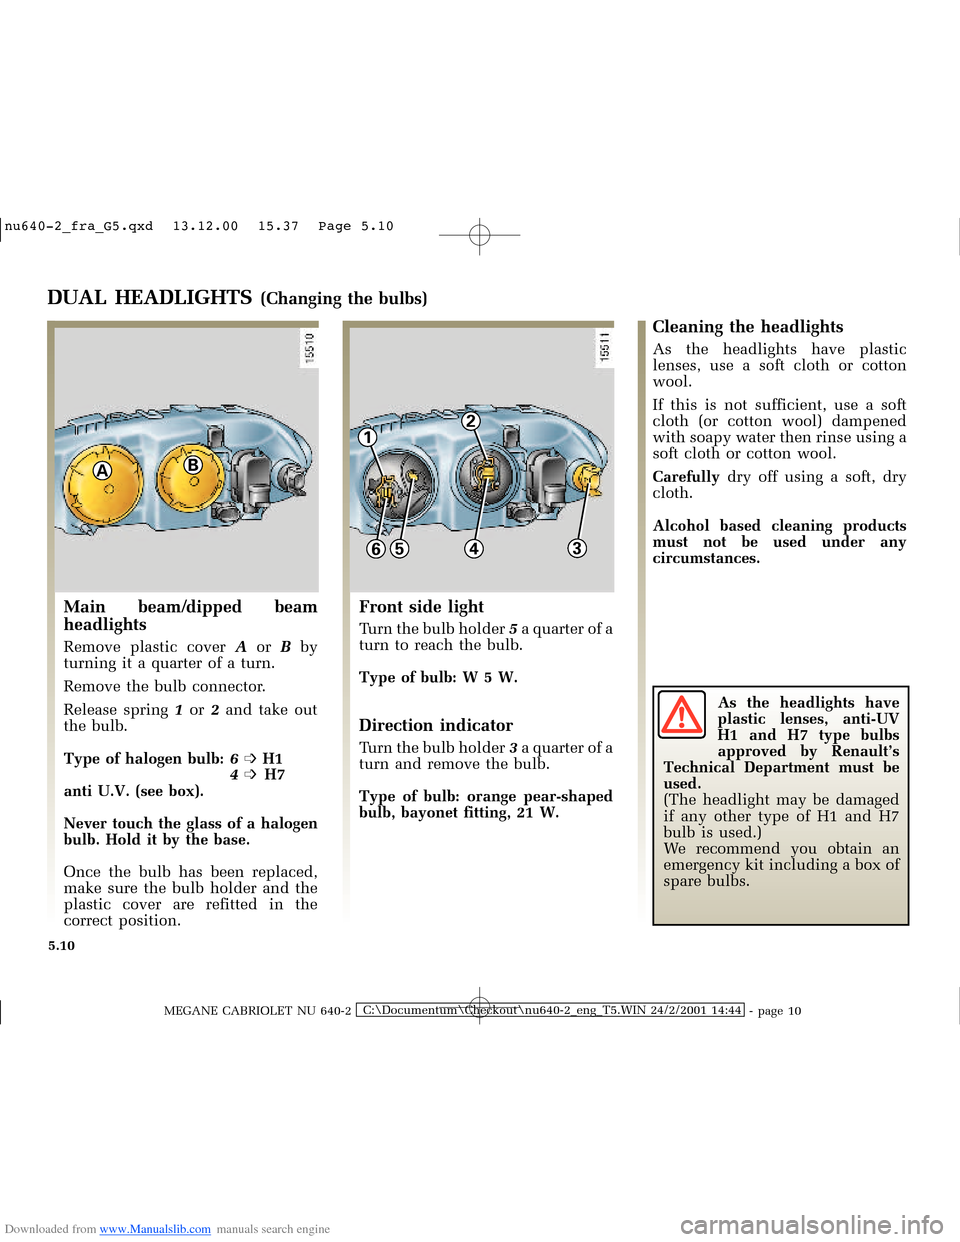 RENAULT MEGANE 2000 X64 / 1.G Owners Manual Downloaded from www.Manualslib.com manuals search engine AB
12
6543
�Q�X������B�I�U�D�B�*���T�[�G� � ��������� � ������ � �3�D�J�H� ����
MEGANE CABRIOLET NU 640-2C:\Docu